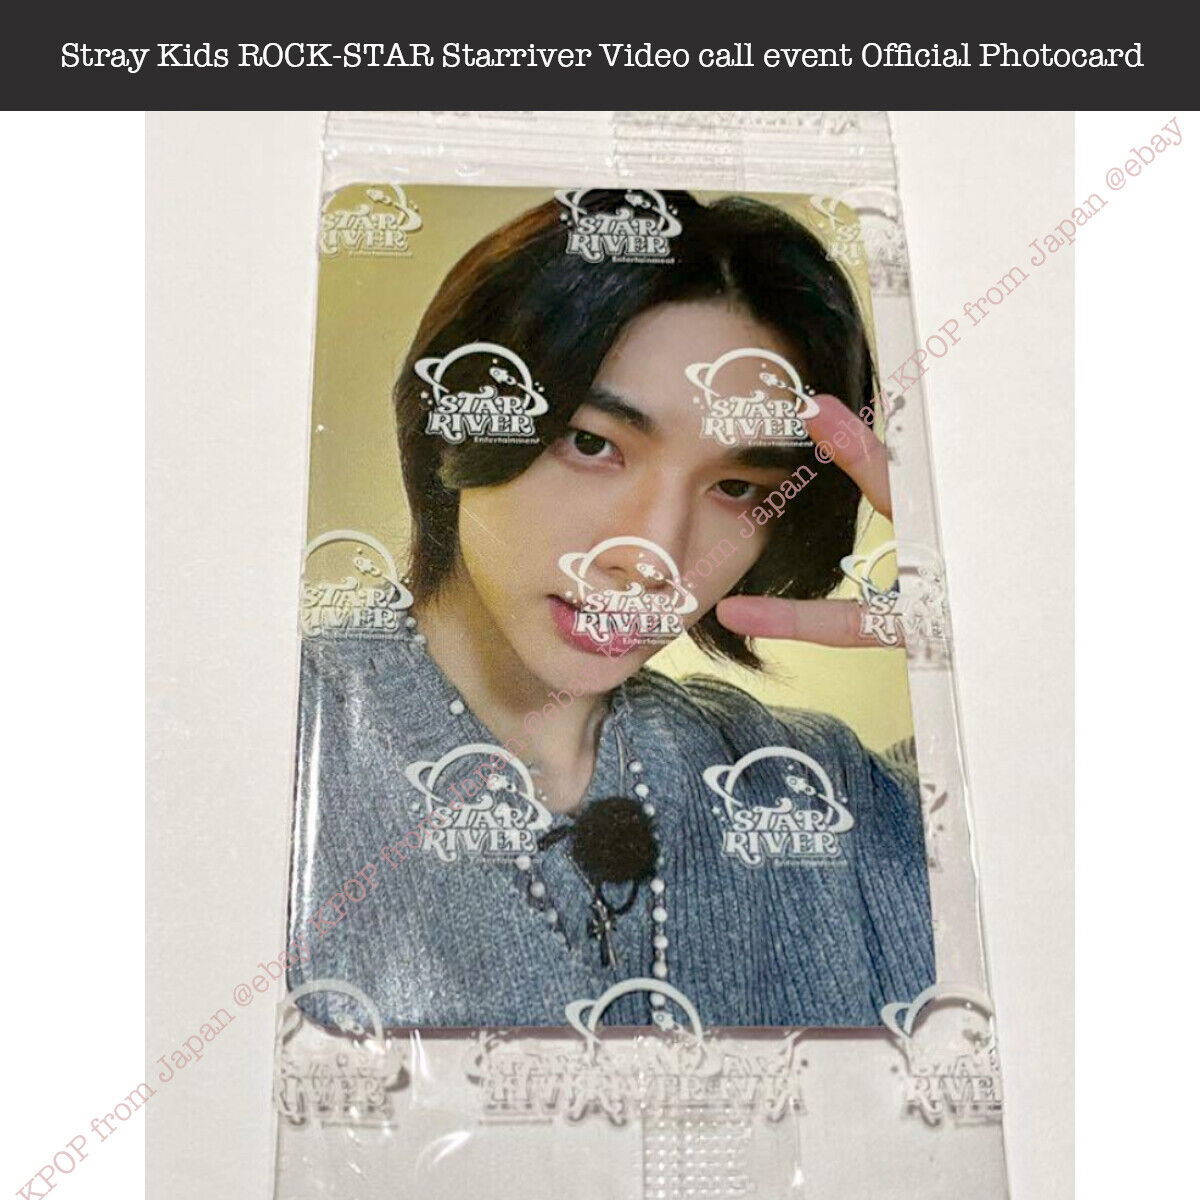 Stray Kids ROCK-STAR Starriver Video call event Official Photocard 